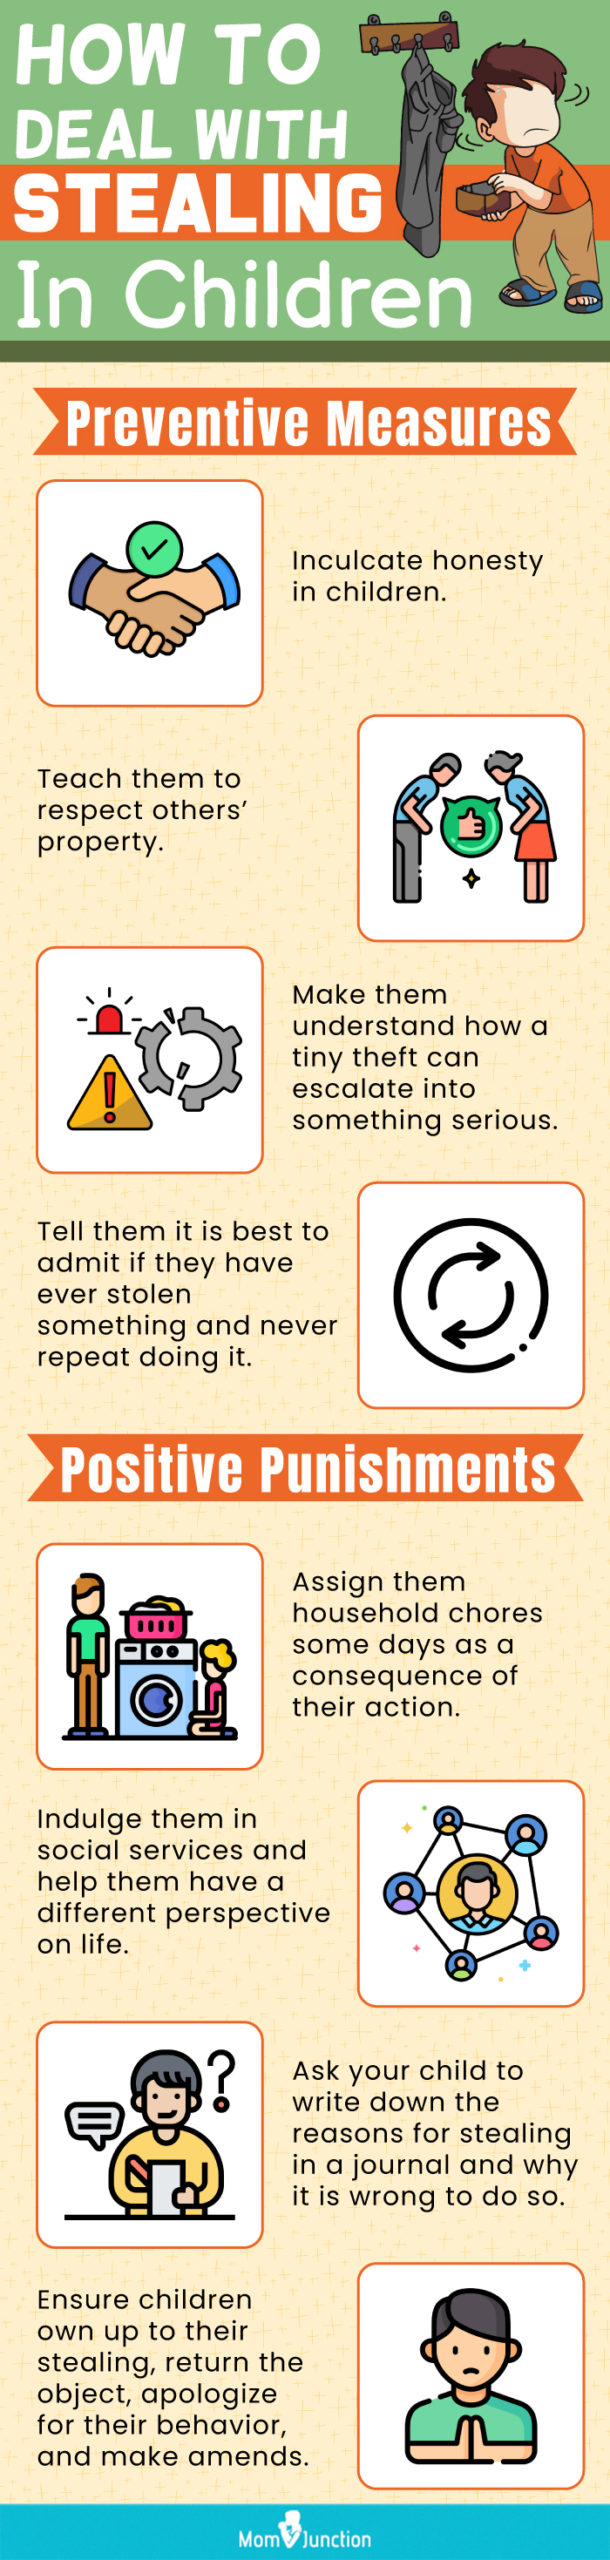 how to deal with stealing in children (infographic)